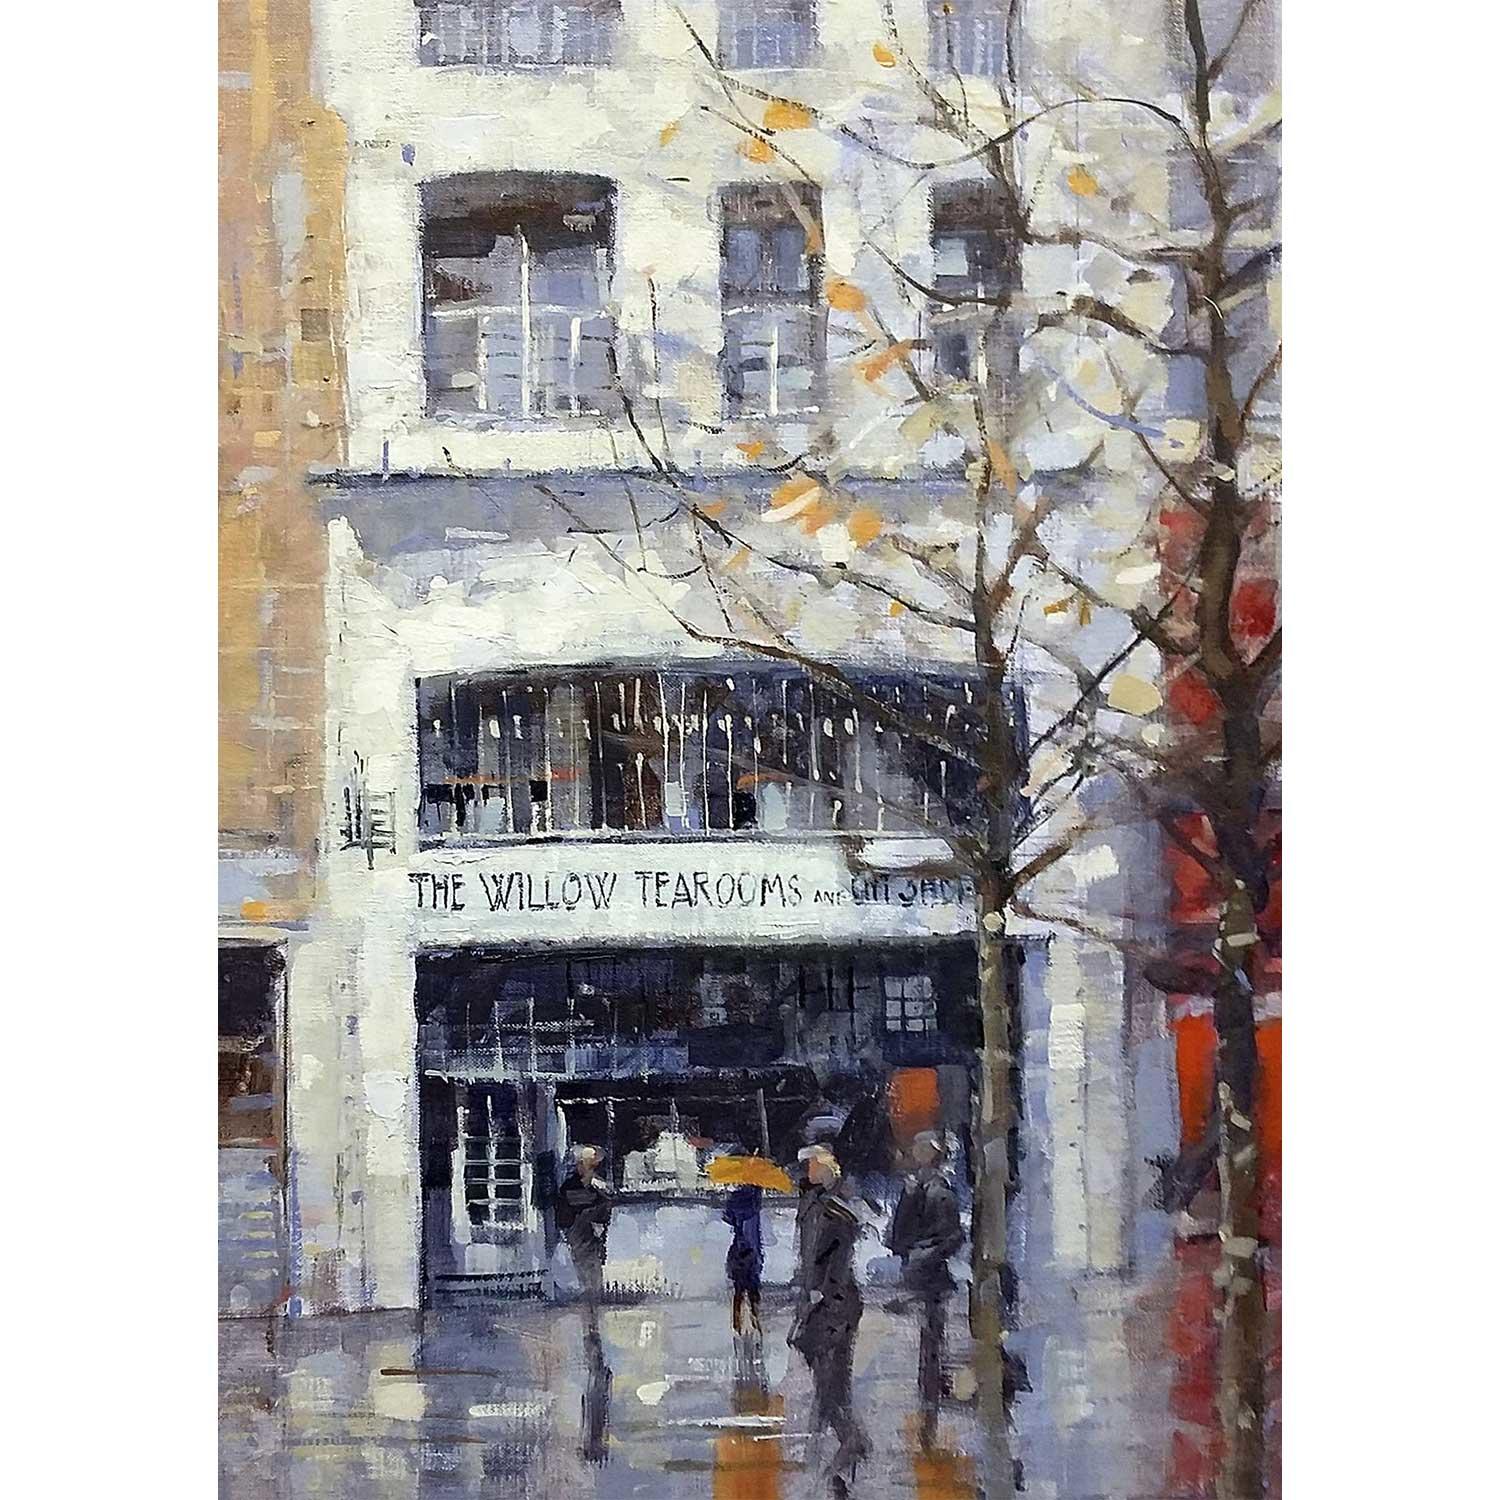 Willow Tearooms, Glasgow by Peter Foyle